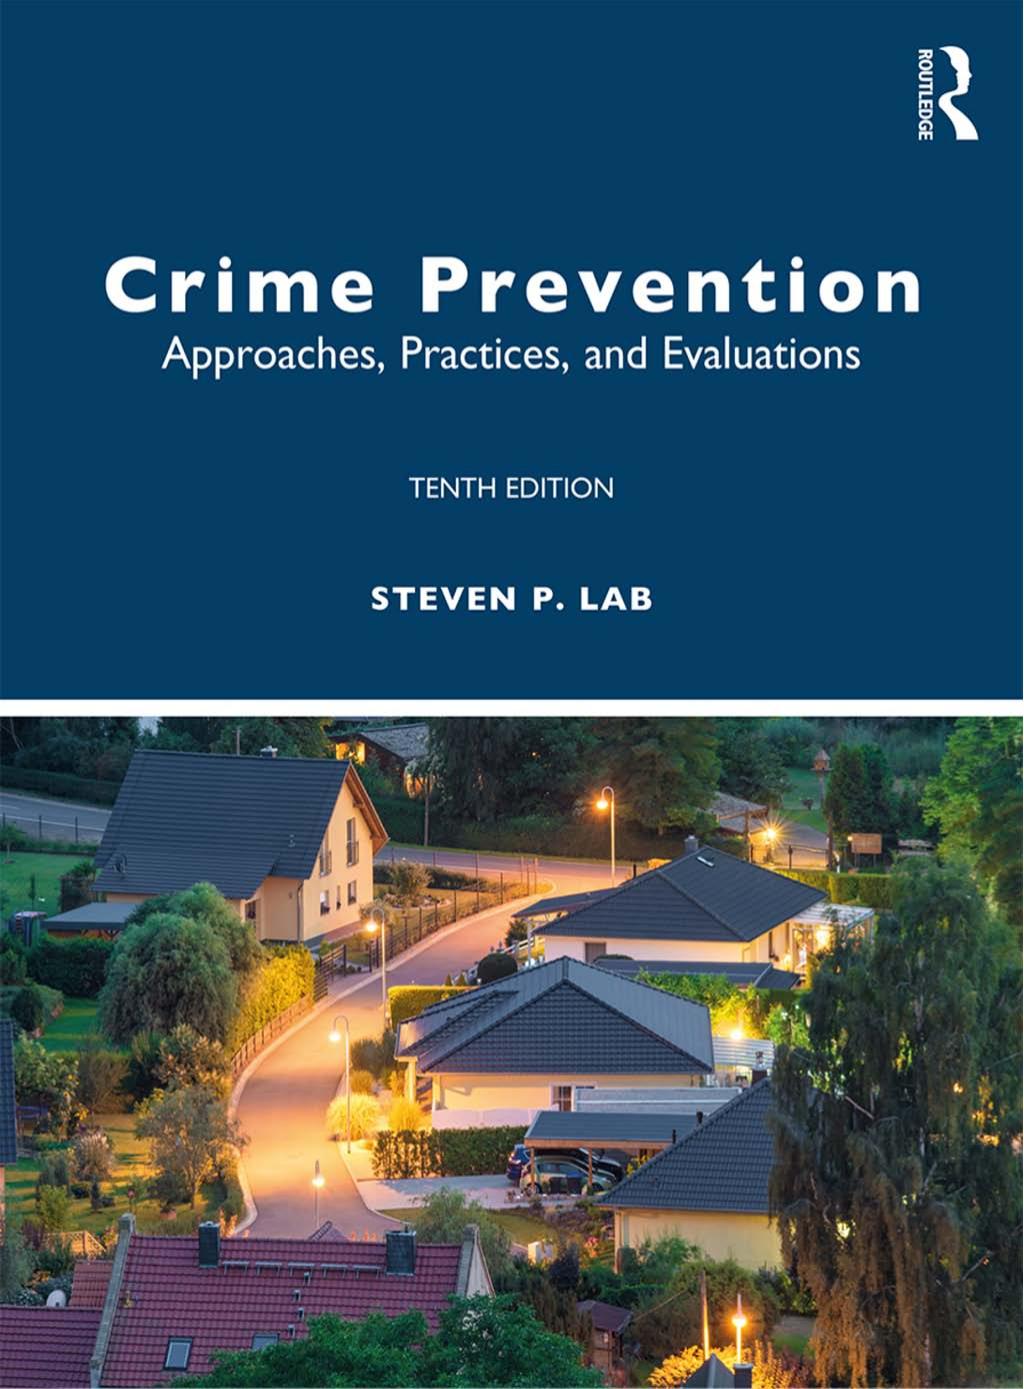 (eBook PDF)Crime Prevention: Approaches, Practices, and Evaluations 10th Edition by Steven P. Lab